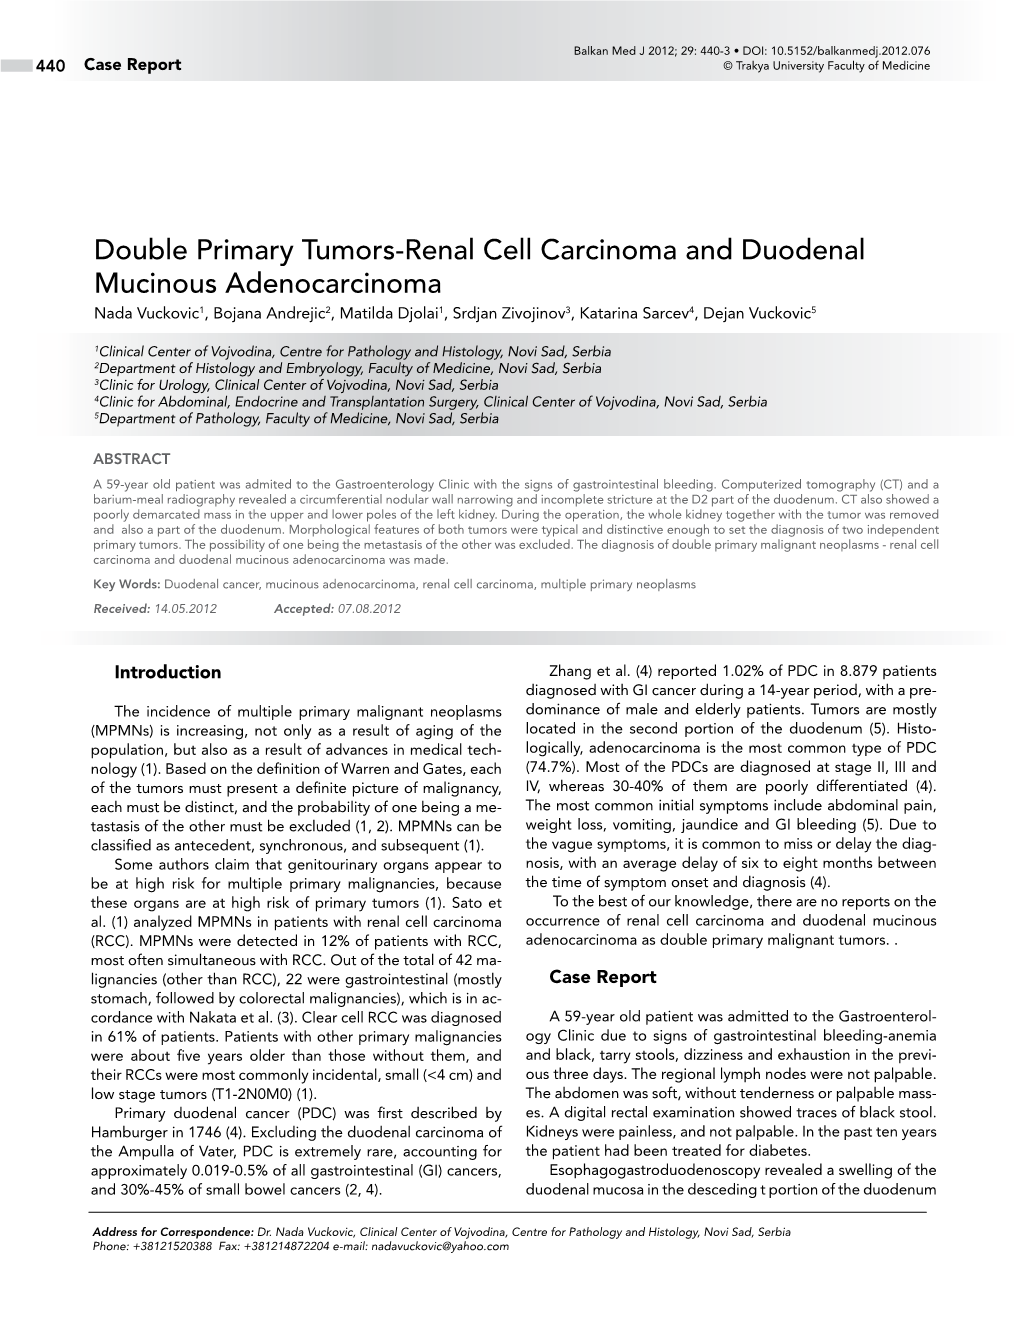 Double Primary Tumors-Renal Cell Carcinoma and Duodenal